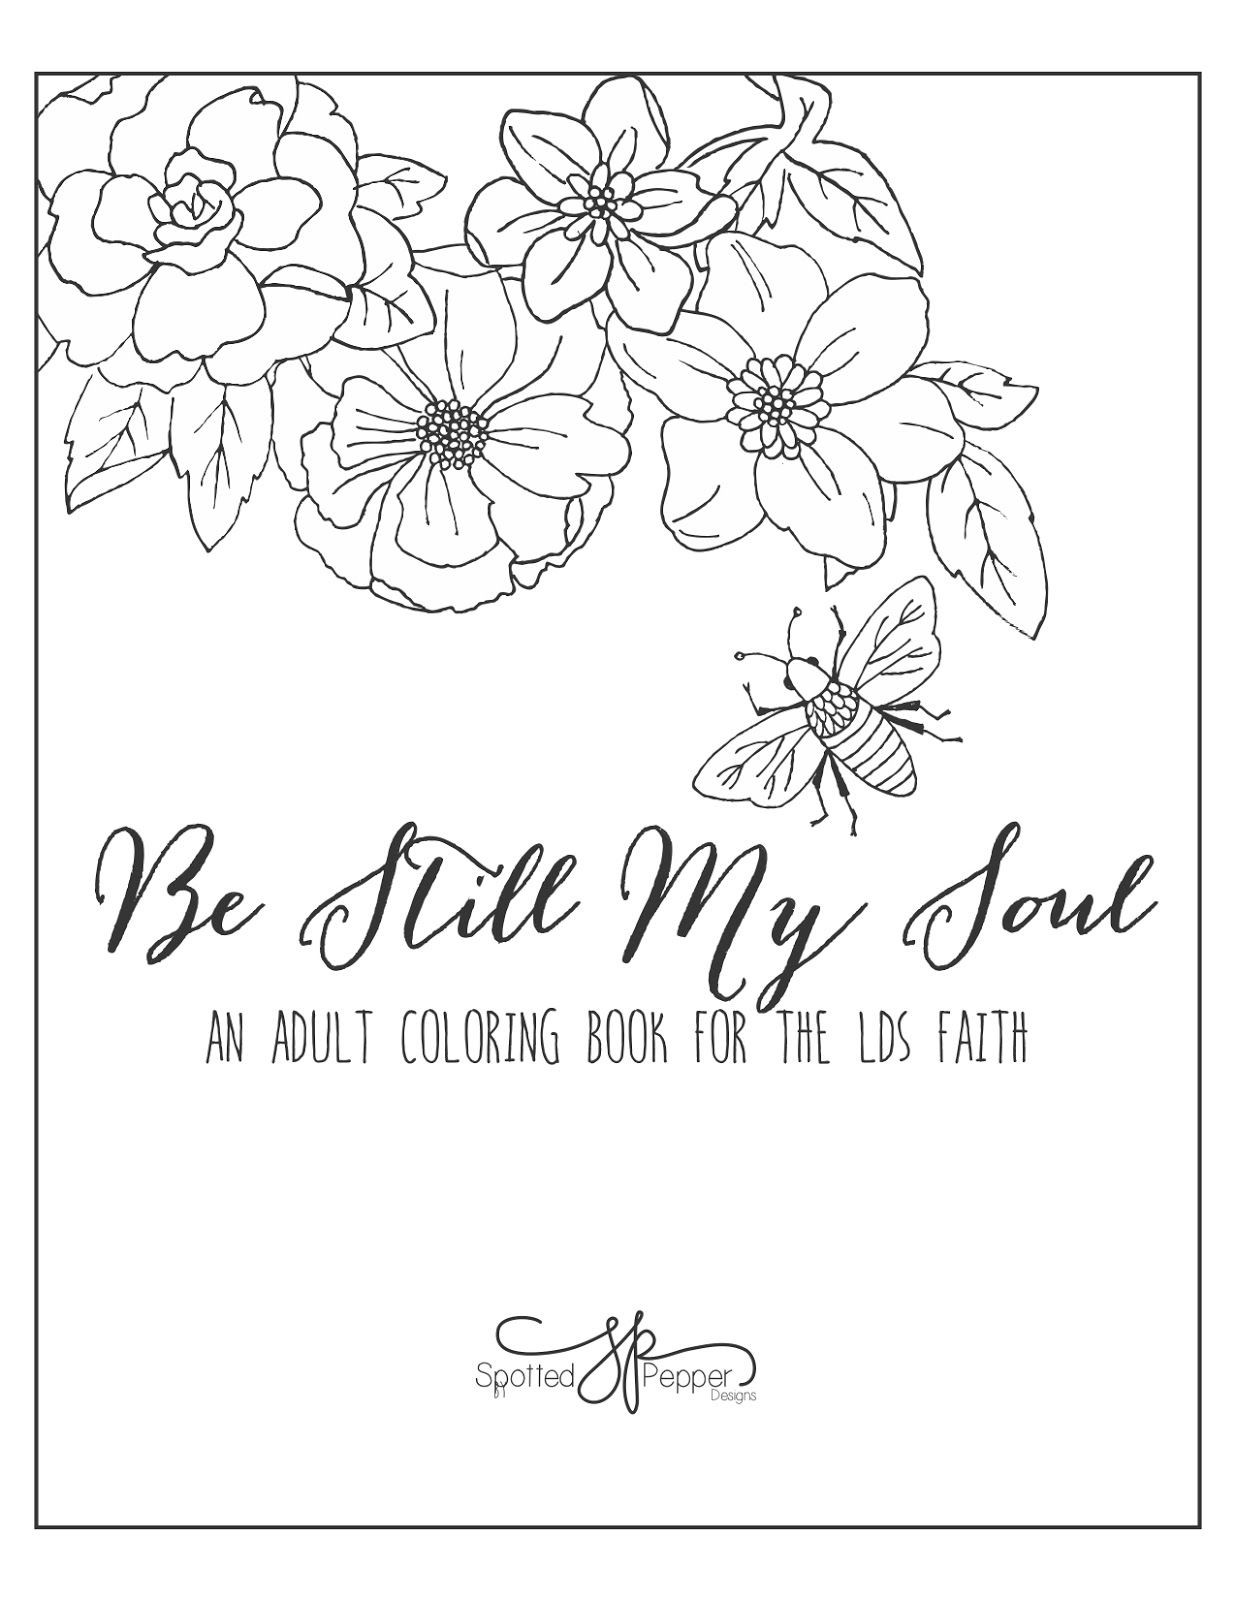 Lds Coloring Pages For Adults
 Spotted Pepper Designs Be Still My Soul a coloring book